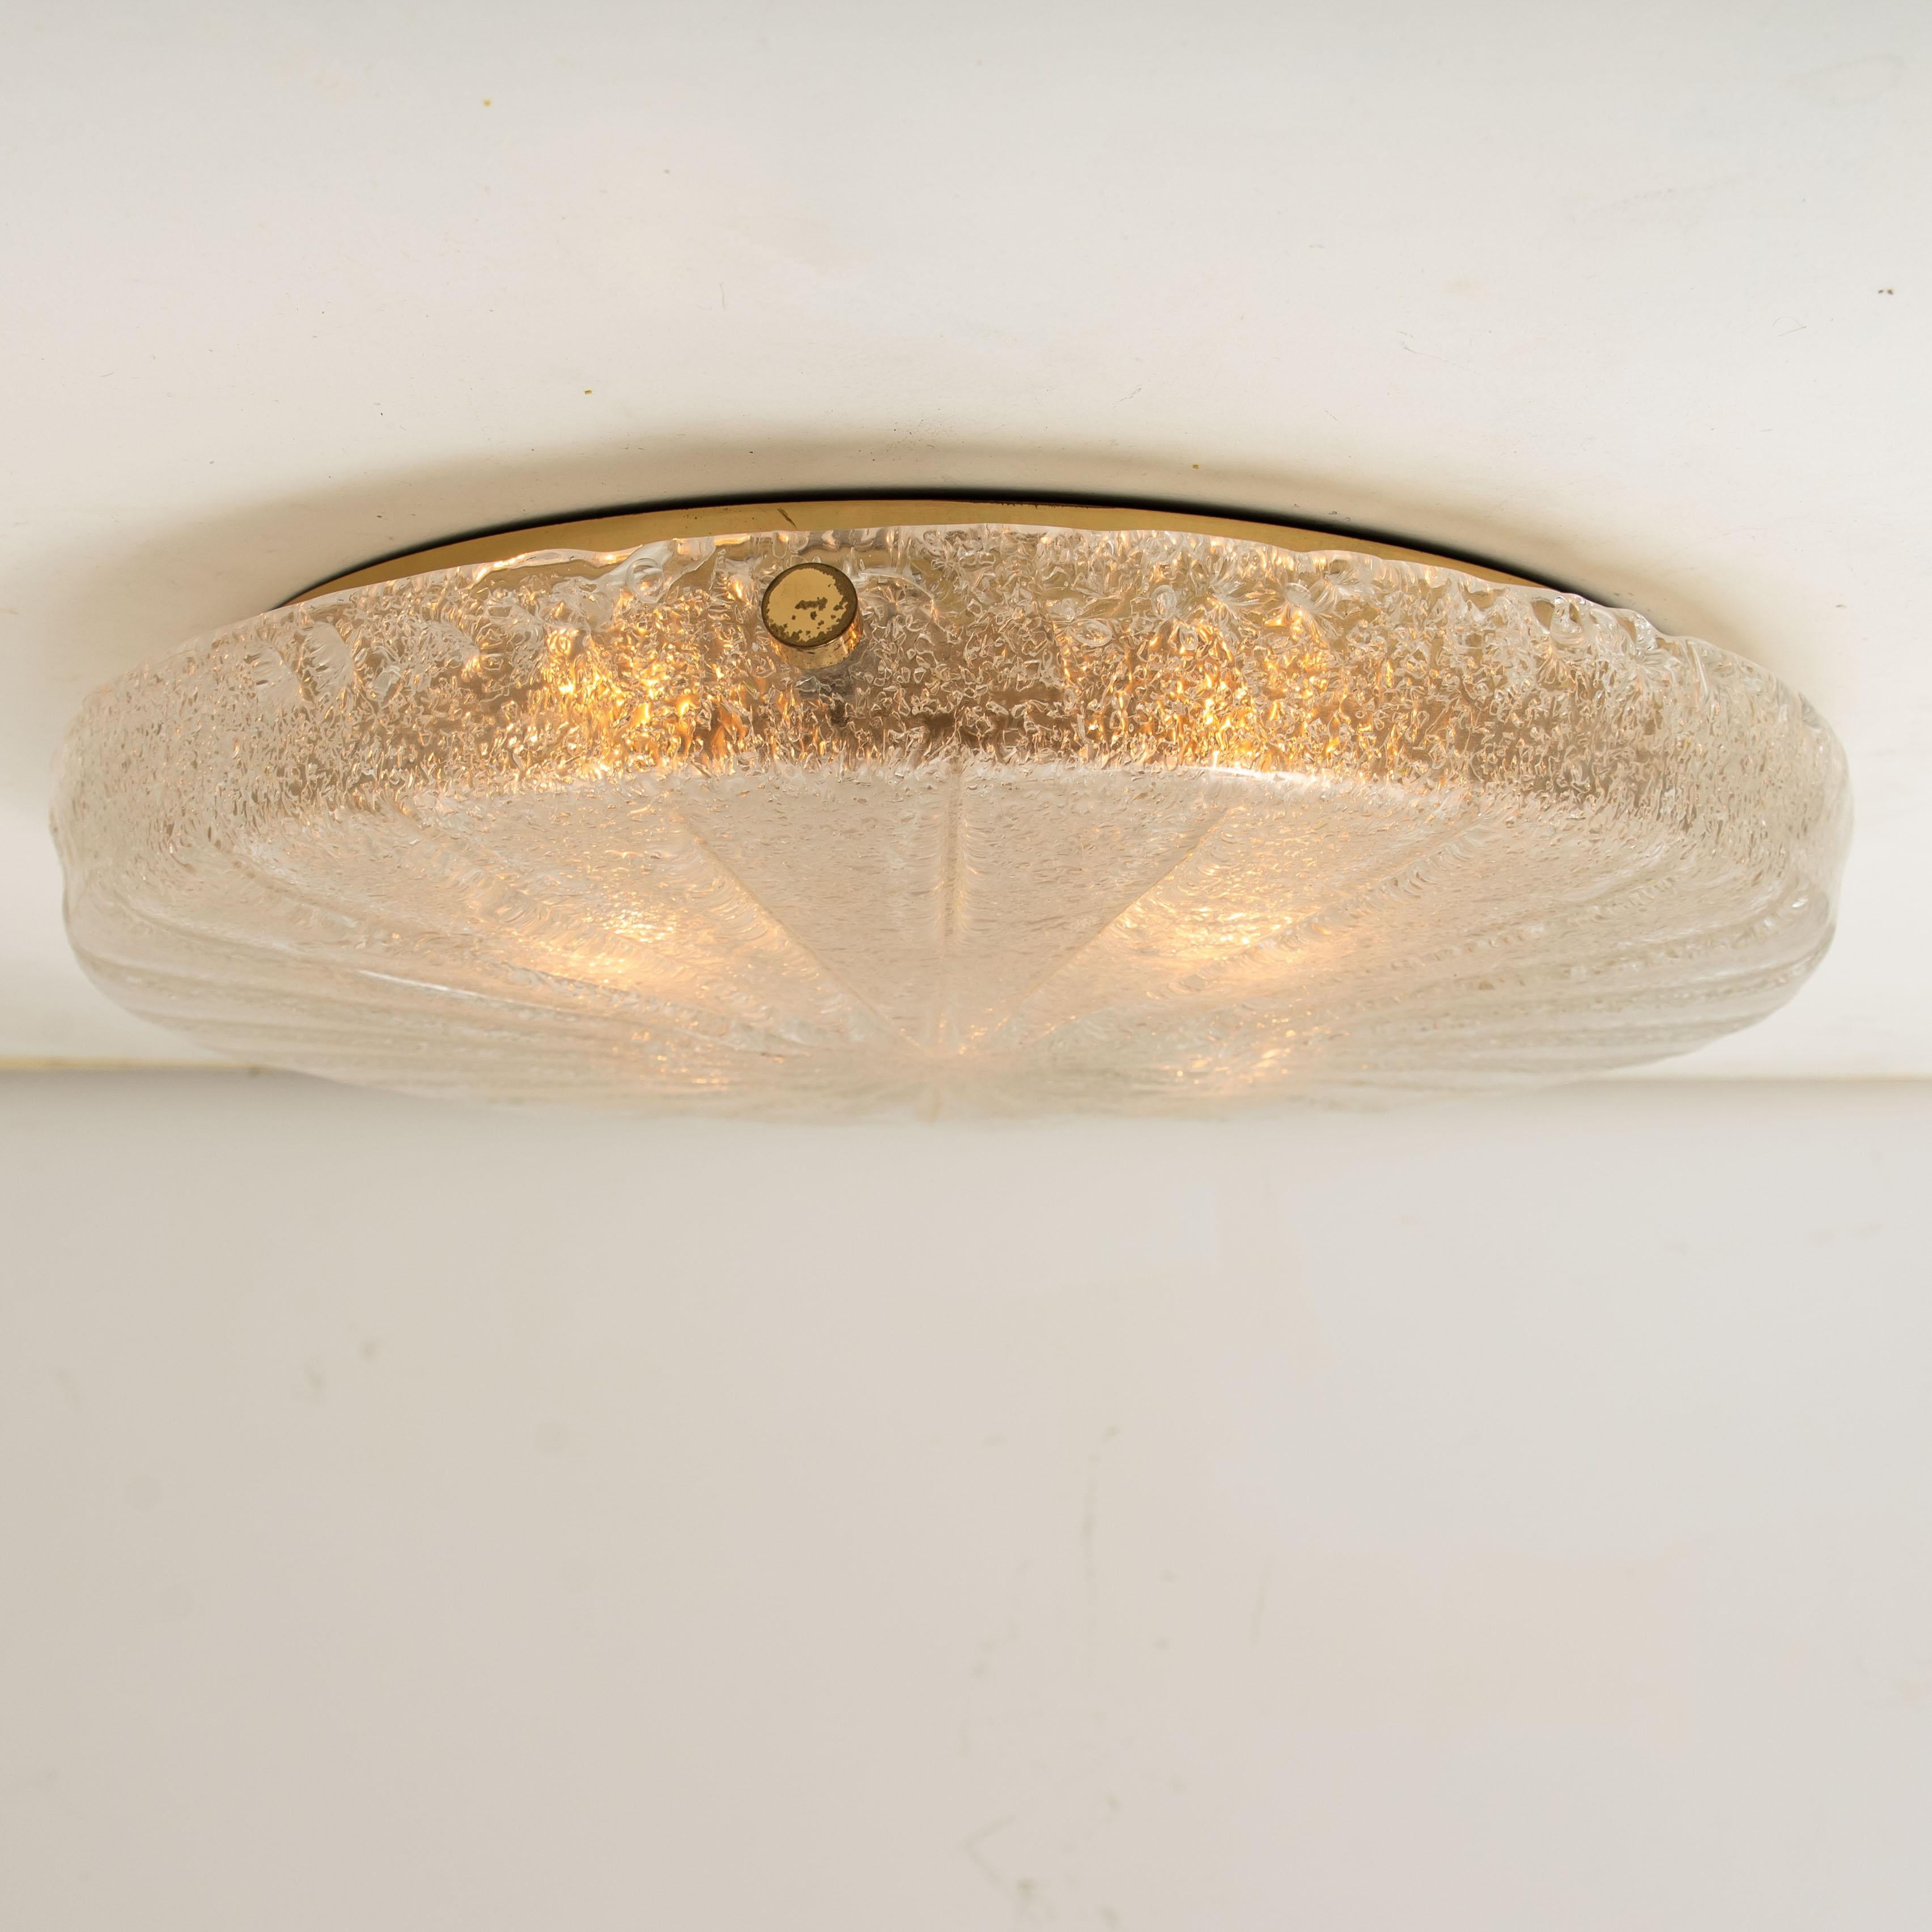 A wonderful round ice glass flush mount by Hillebrand, Germany, 1970s.
Thick sunburst surface pattern on a brass base. Illuminates beautifully.

Can also work for impressive wall light! 

High quality and in very good condition. Cleaned, well-wired